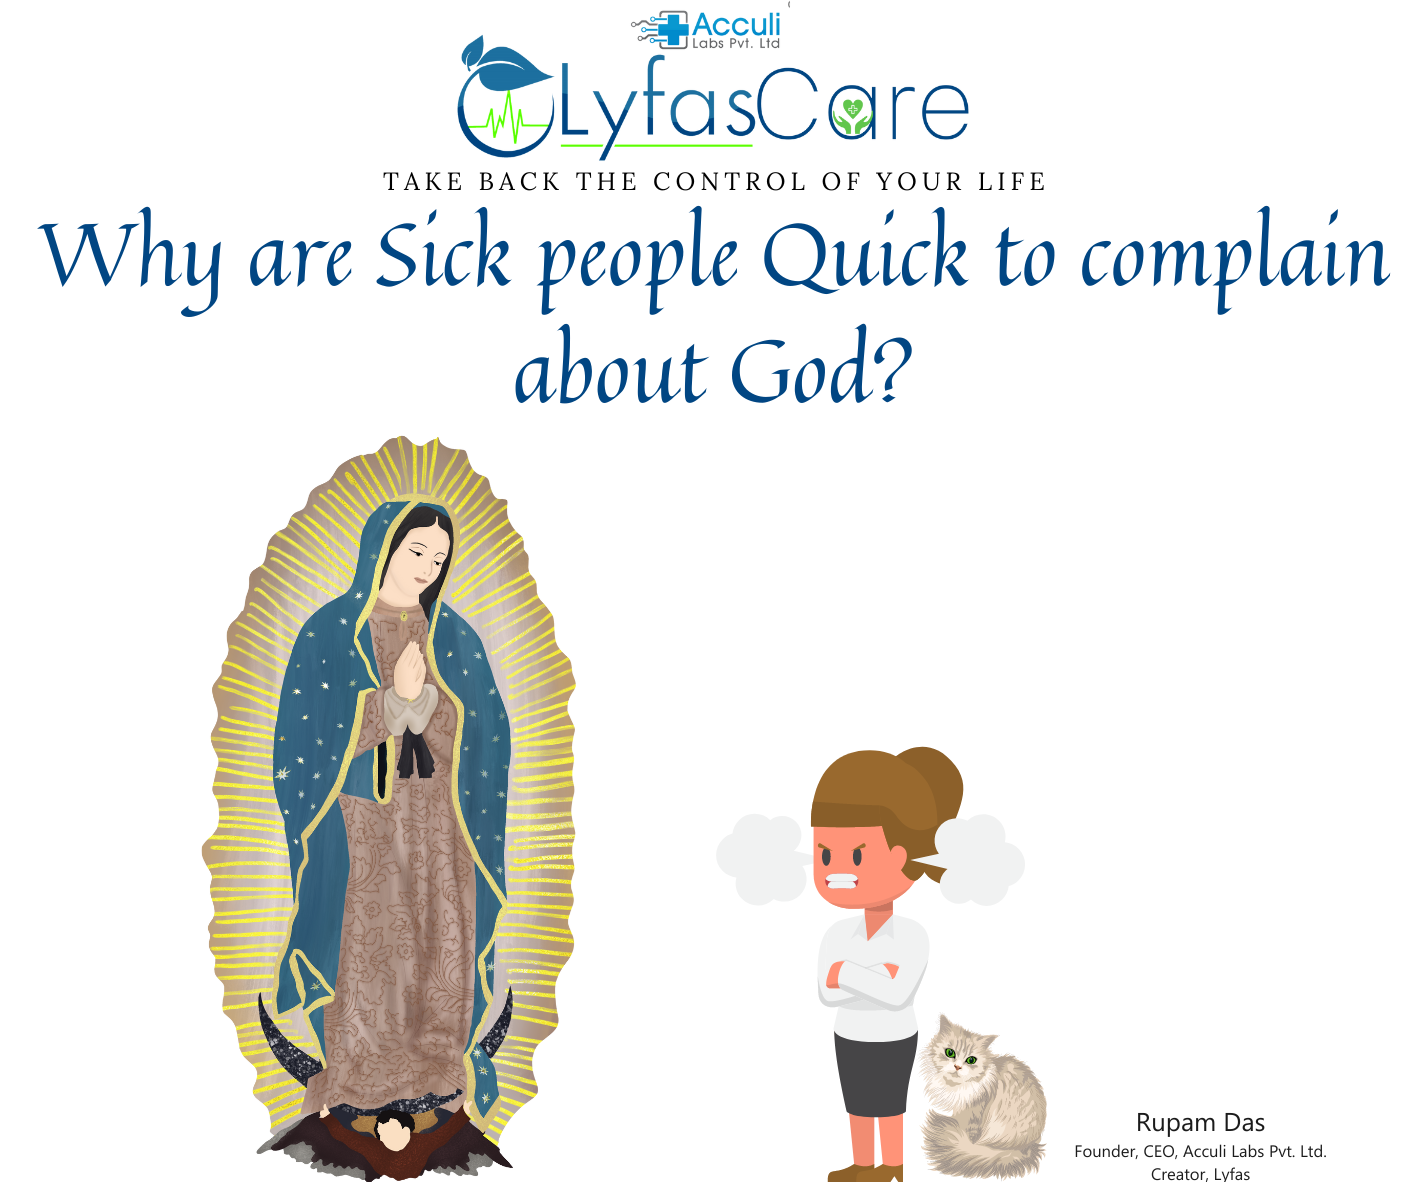 Why are Sick people Quick to complain about God?